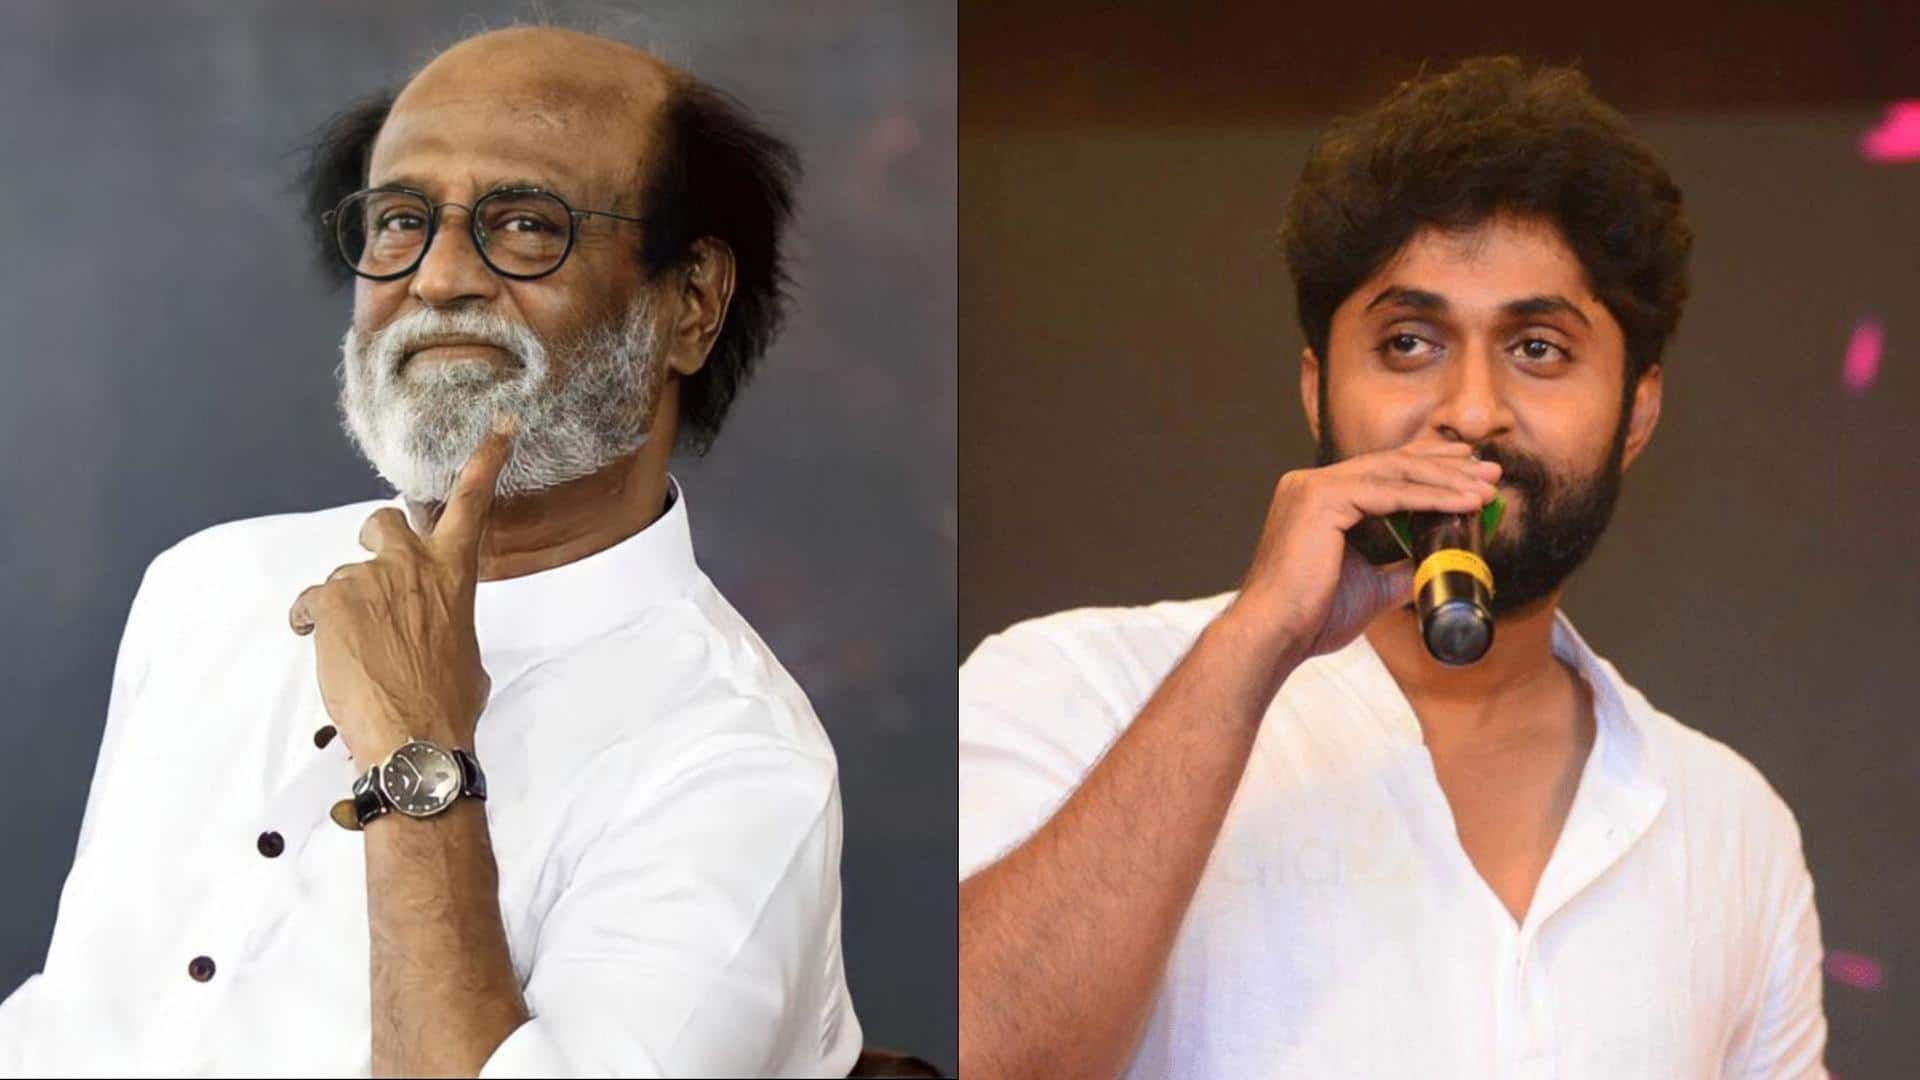 Rajinikanth vs Dhyan Sreenivasan: What's 'Jailer' films' controversy all about